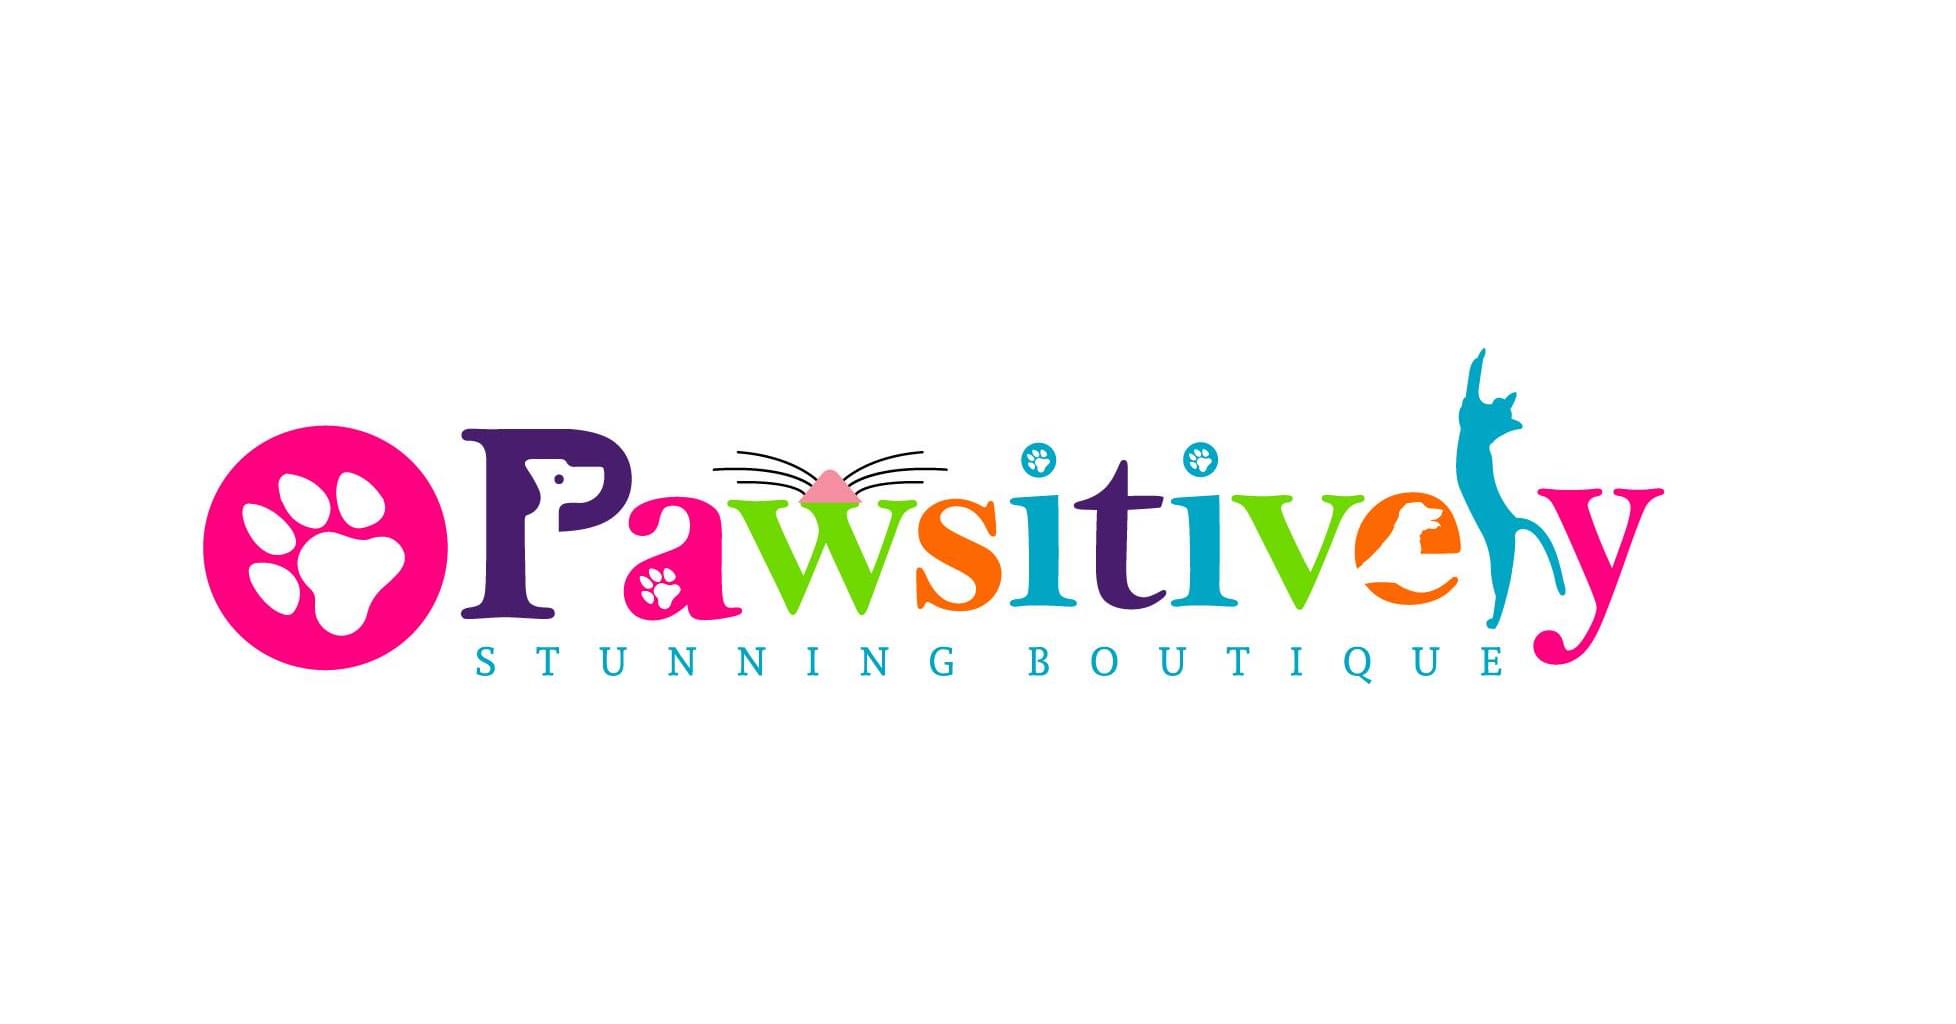 Pawsitively Stunning Boutique Logo